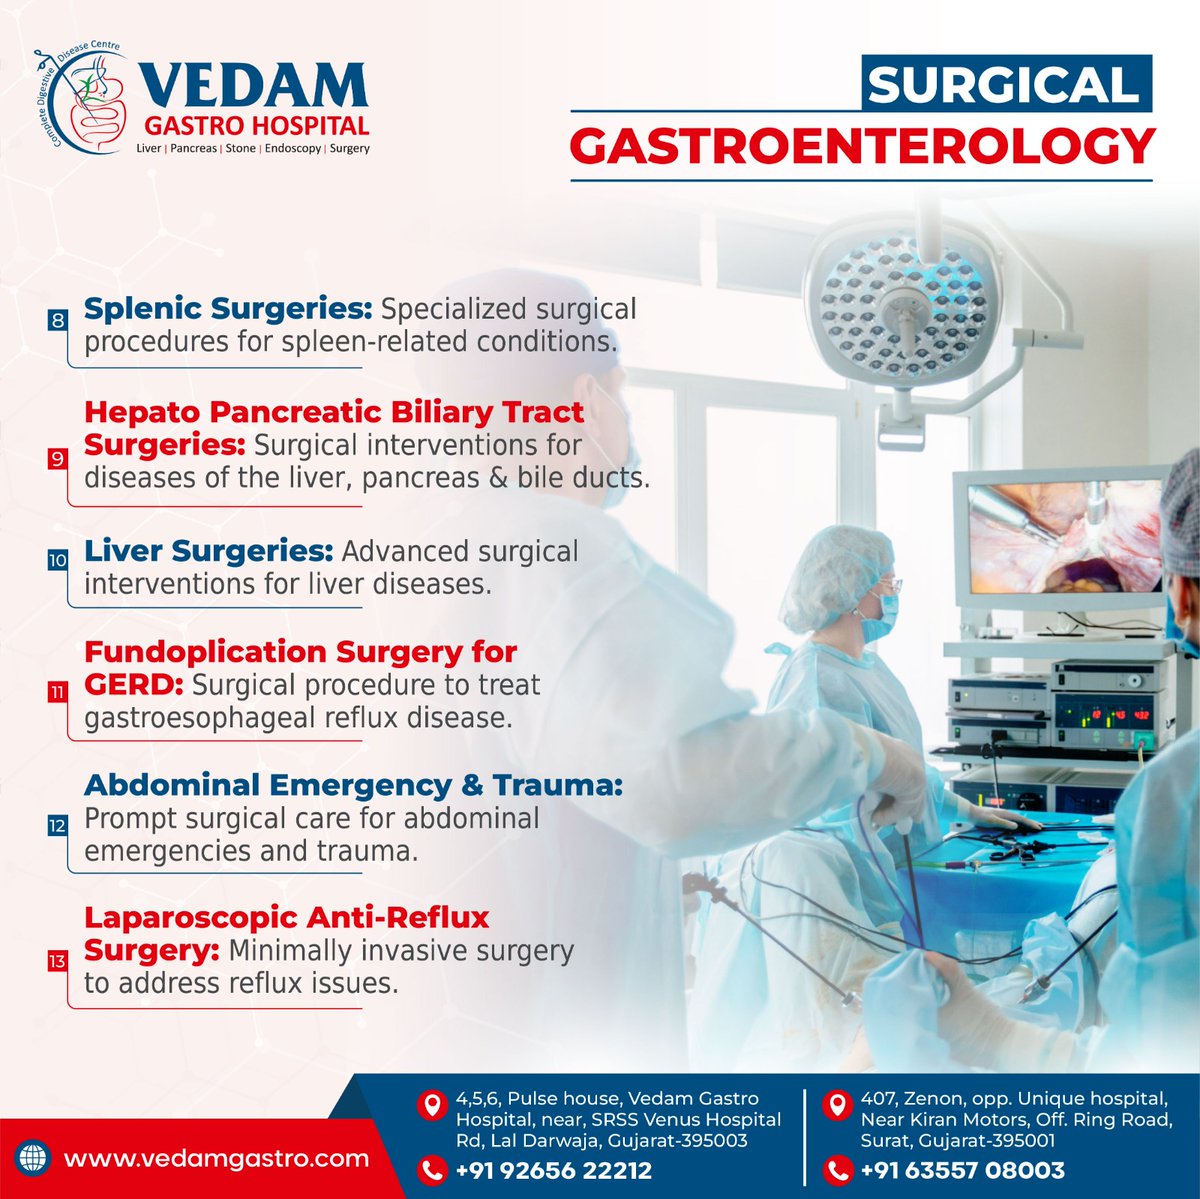 🏥 Discover the world of advanced surgical services at Vedam Hospital. From minimally invasive procedures to complex surgeries, we provide comprehensive solutions for various conditions.💙 #VedamHospital #SurgicalServices #HOSPITAL #Surat #Gastrointestinal